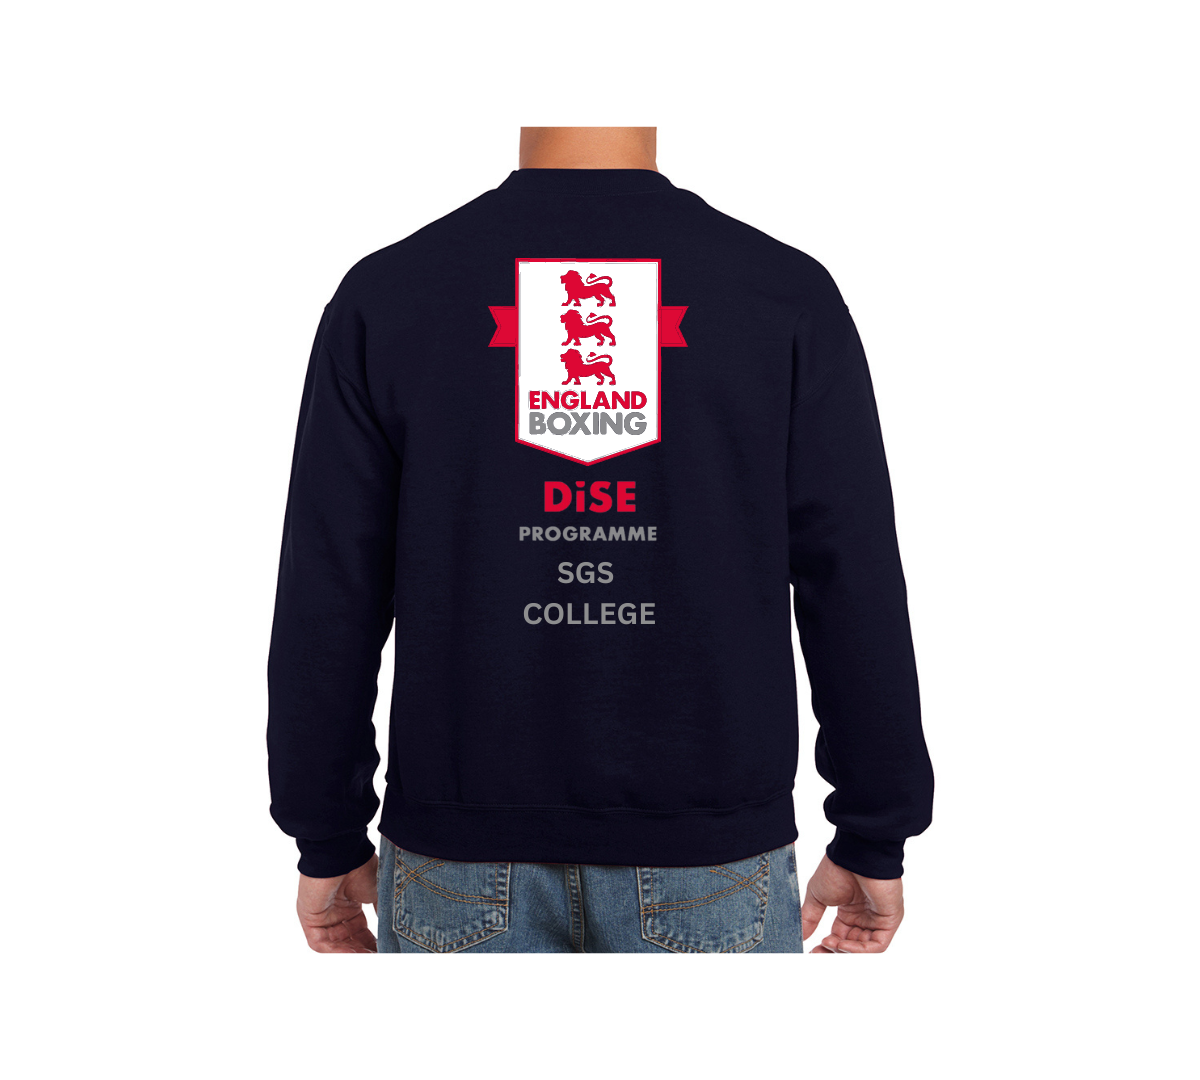 DiSE Programme (SGS College) Oversized Sweater